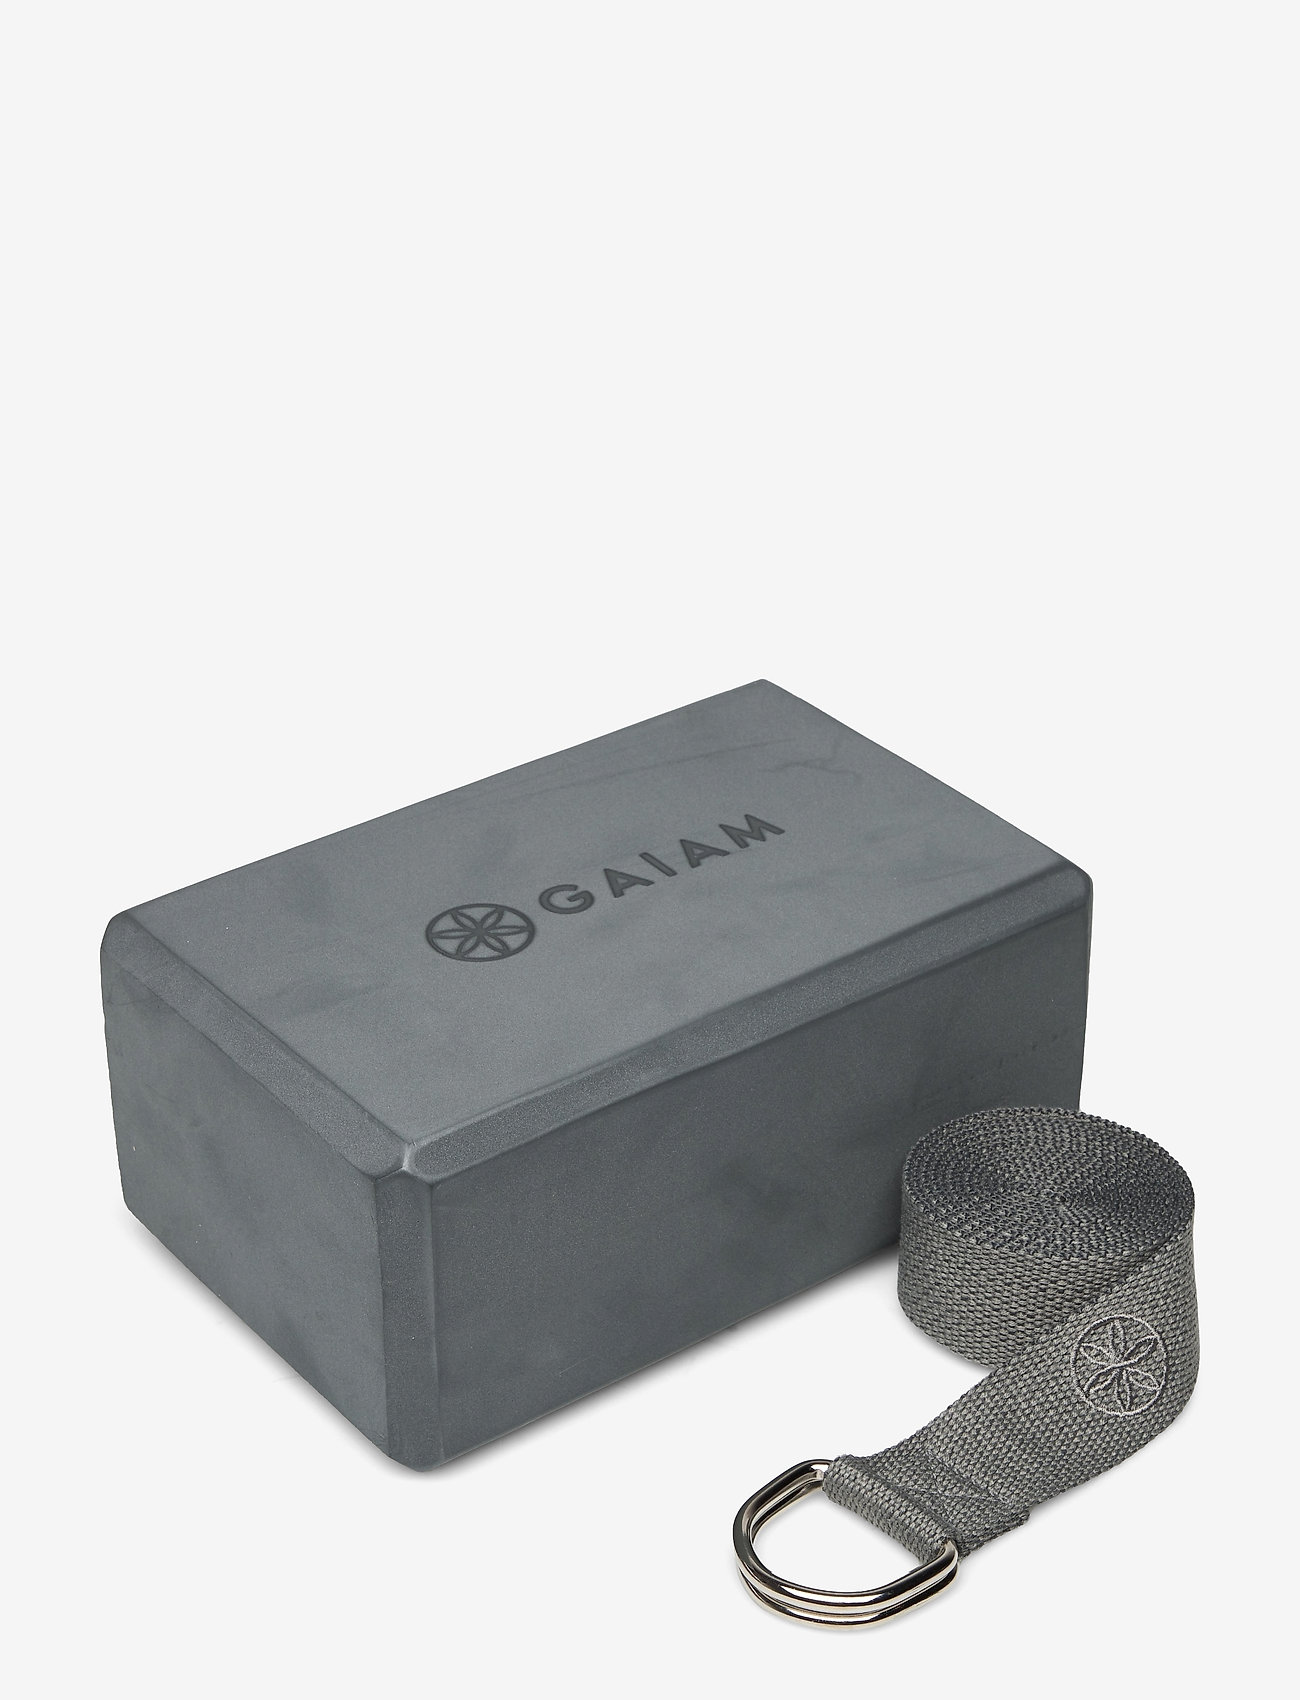 Gaiam Yoga Strap and Foam Block Combo Gray for sale online 